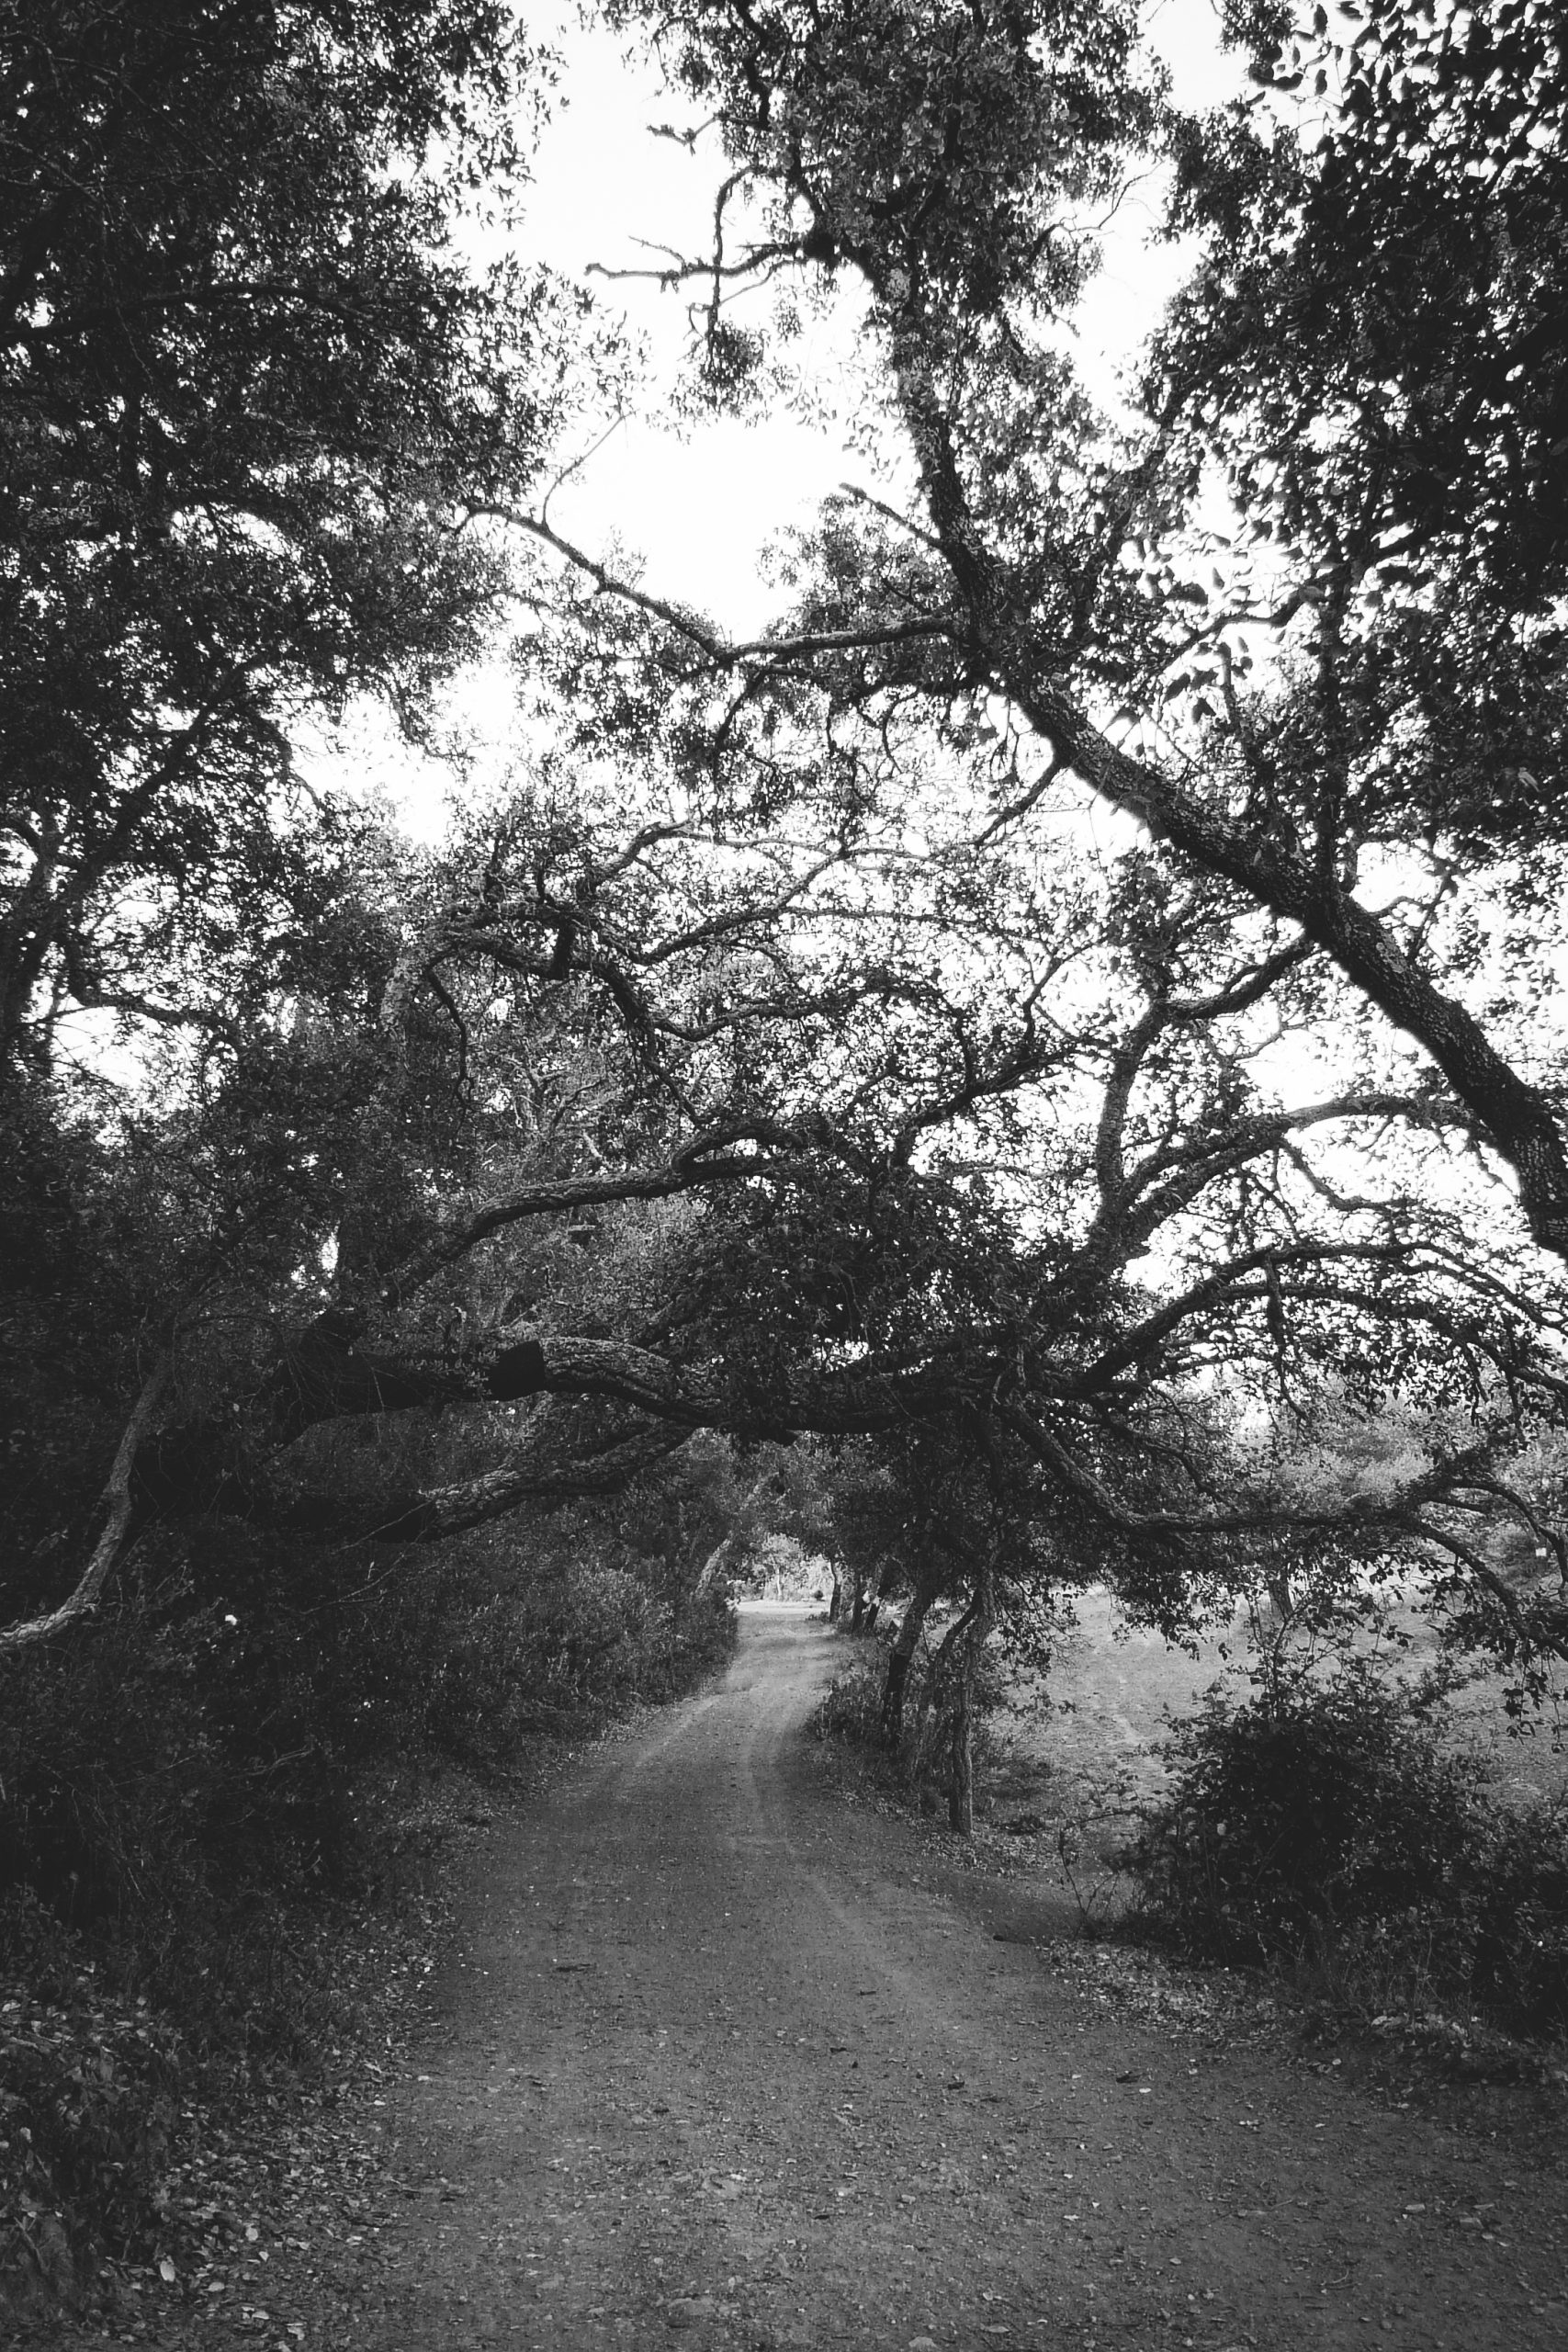 Black and white photograph of a rural country road surrounded by trees.